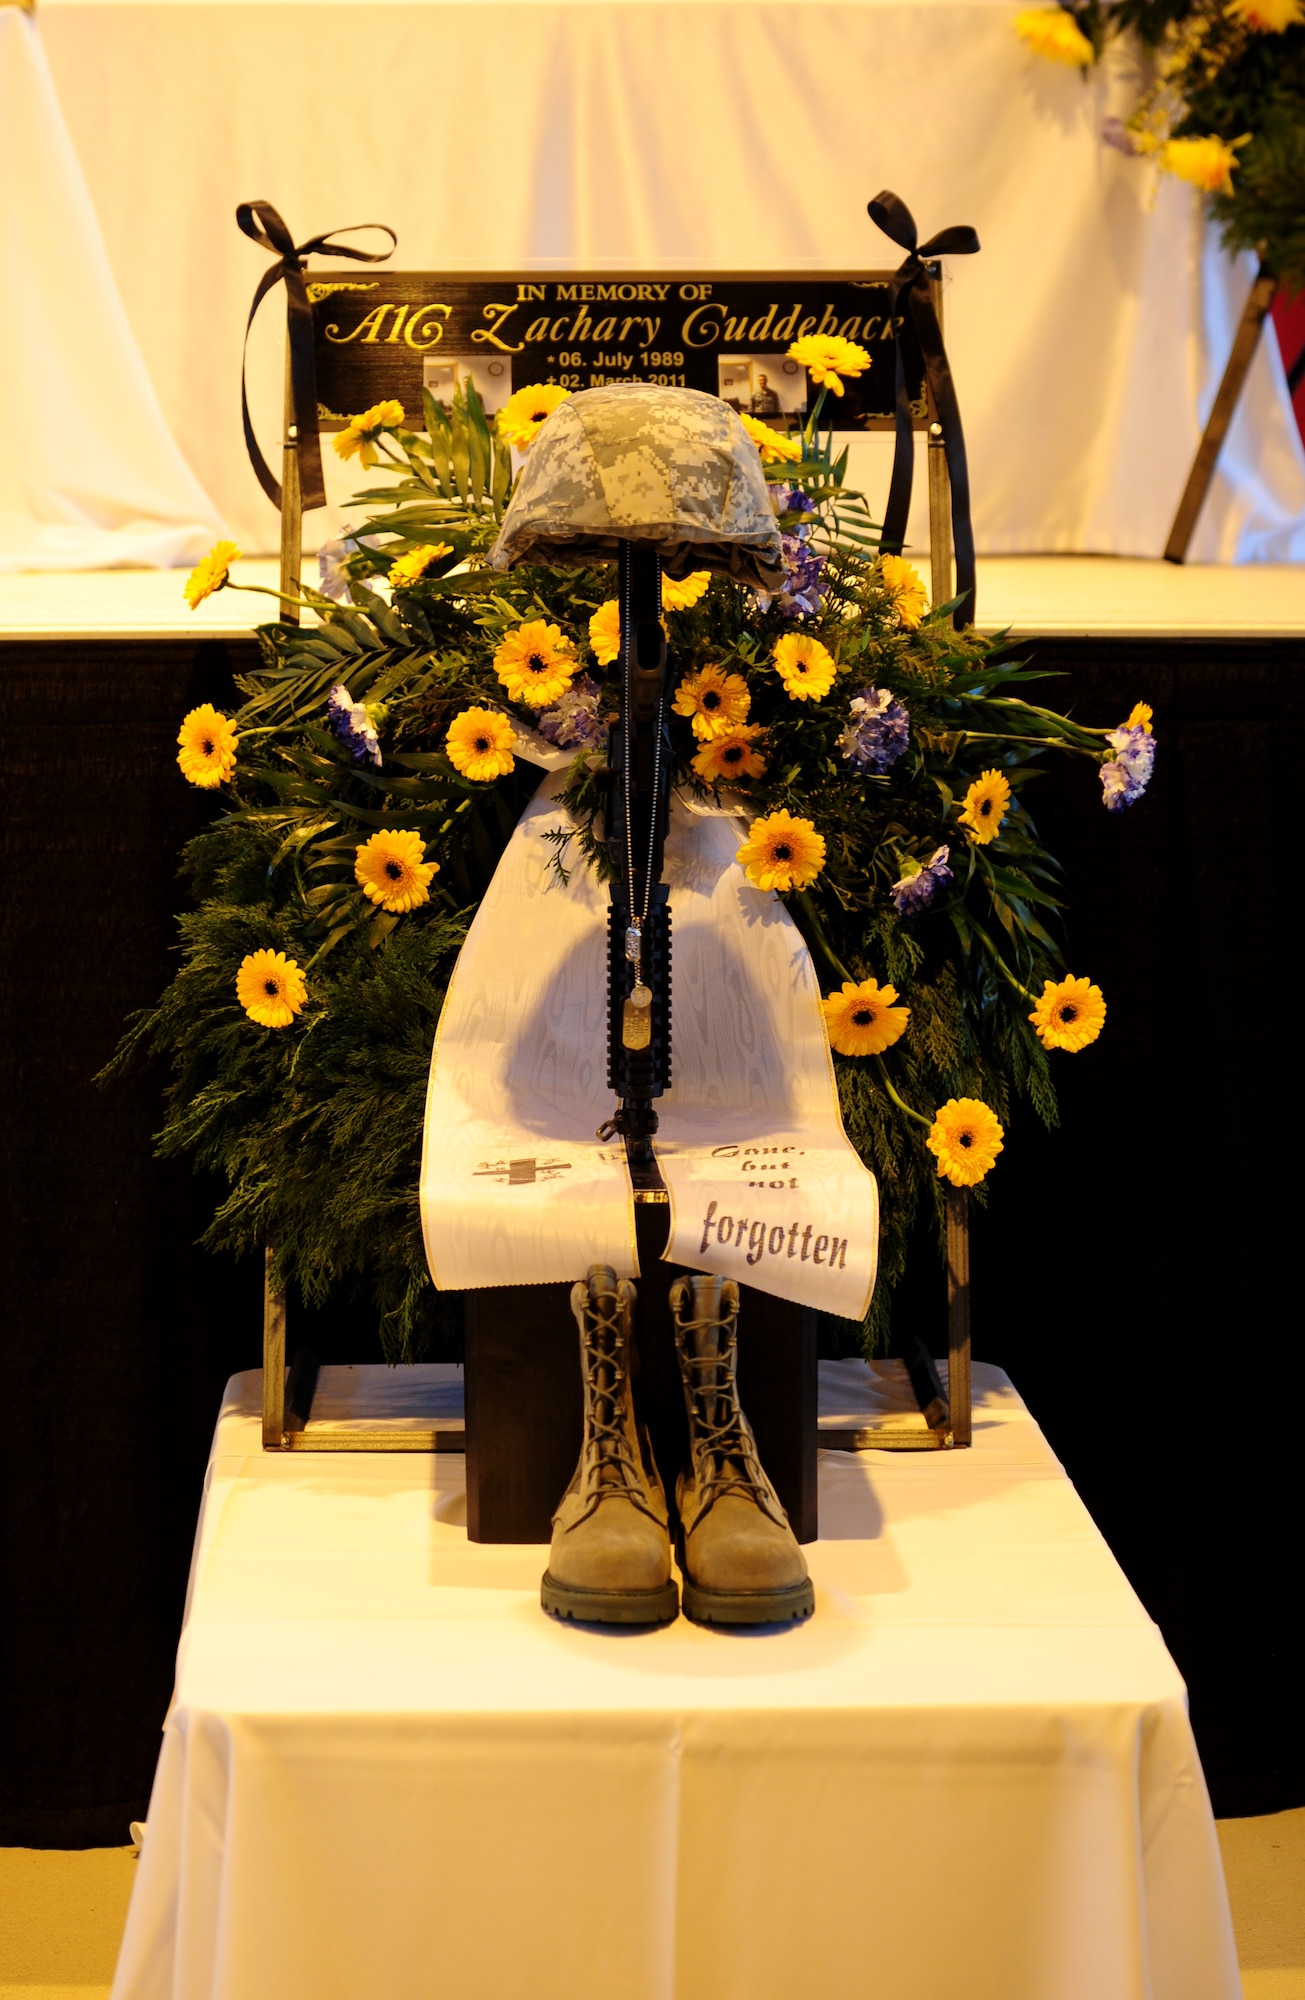 U.S. Air Force Airman 1st Class Zachery Cuddeback's battlefield cross is displayed during his memorial ceremony Ramstein Air Base, Germany, March 10, 2011. Airman Cuddeback, 86th Vehicle Readiness Squadron, was killed in action at Frankfurt International Airport March 2, 2011. (U.S. Air Force photo by Senior Airman Brittany Perry)